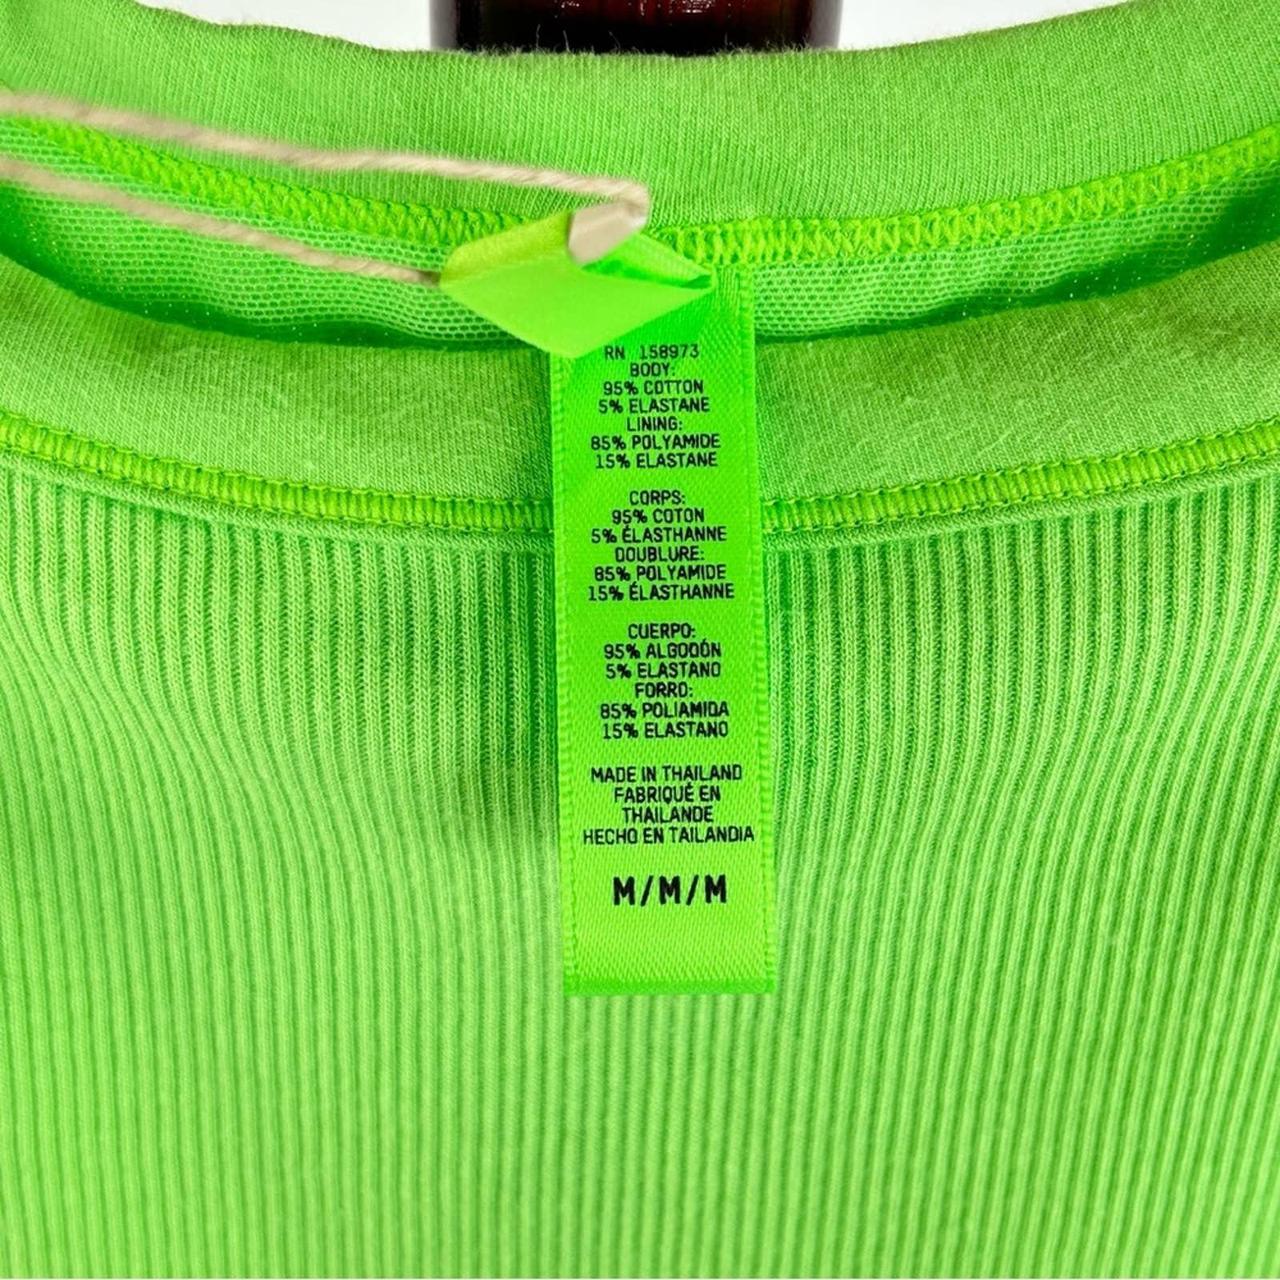 Skims new neon green cotton collection review, Gallery posted by  madisoneley